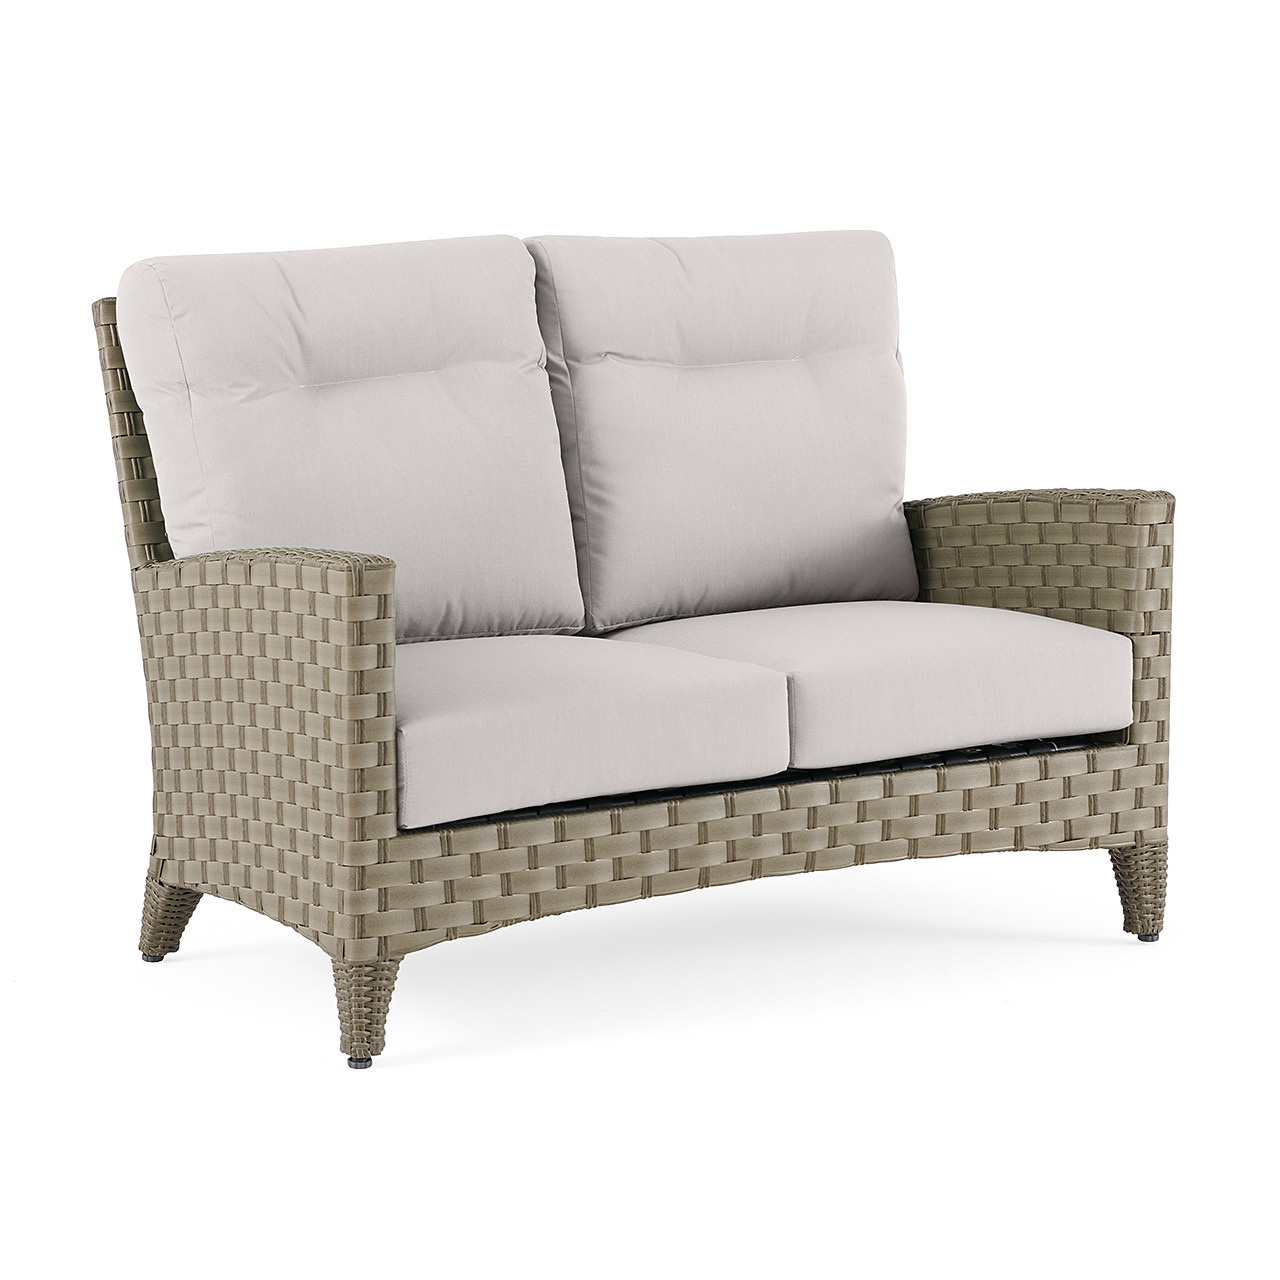 Gramercy Outdoor Wicker with Cushions 4 Piece Loveseat Set + 32 in. Sq. Coffee Table